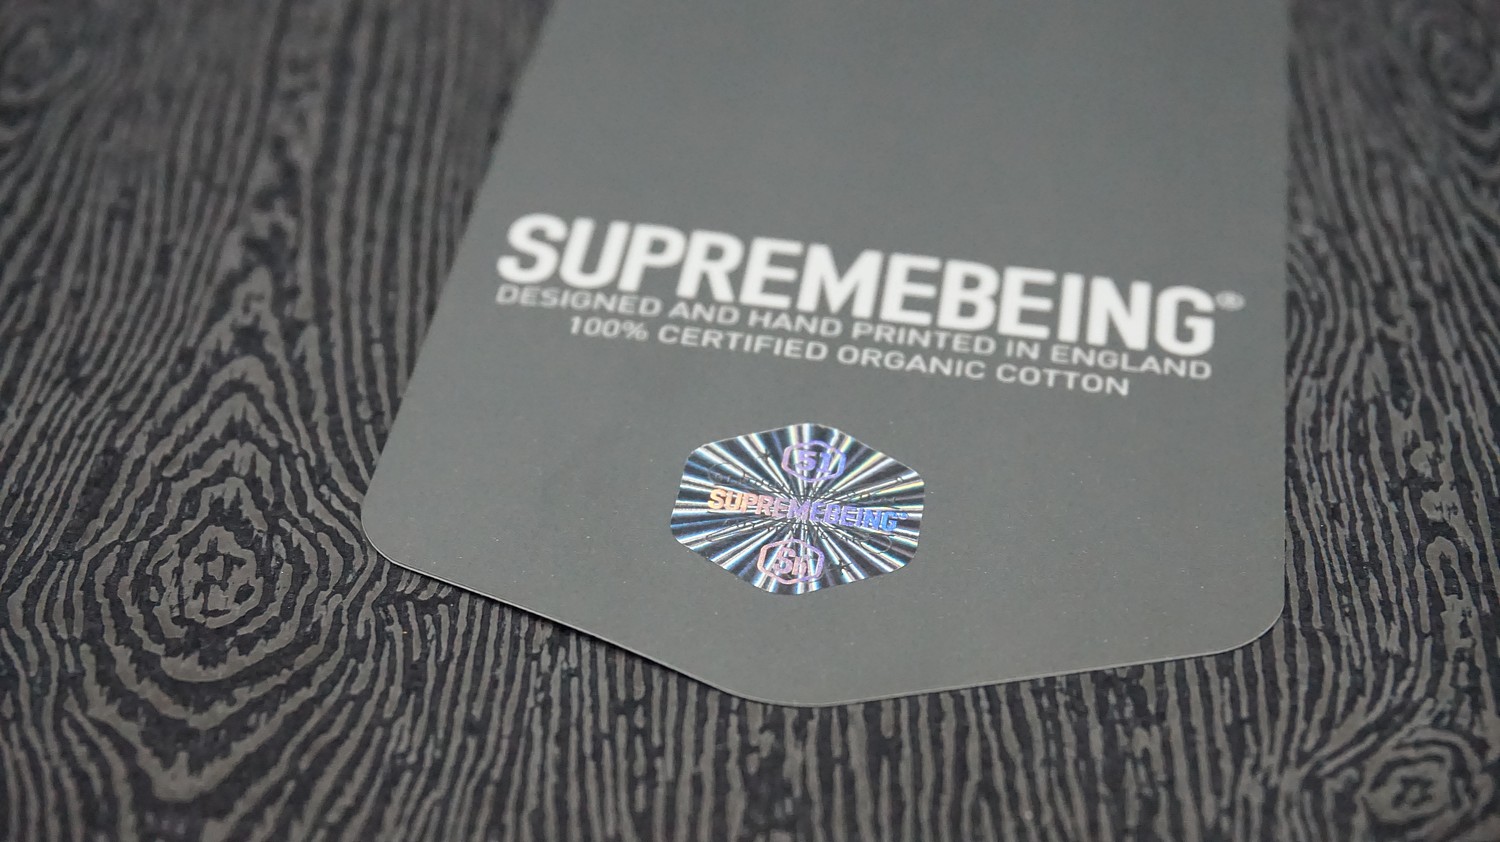 Supreme Being Swing Tag with Holographic Foil, 2nd photo